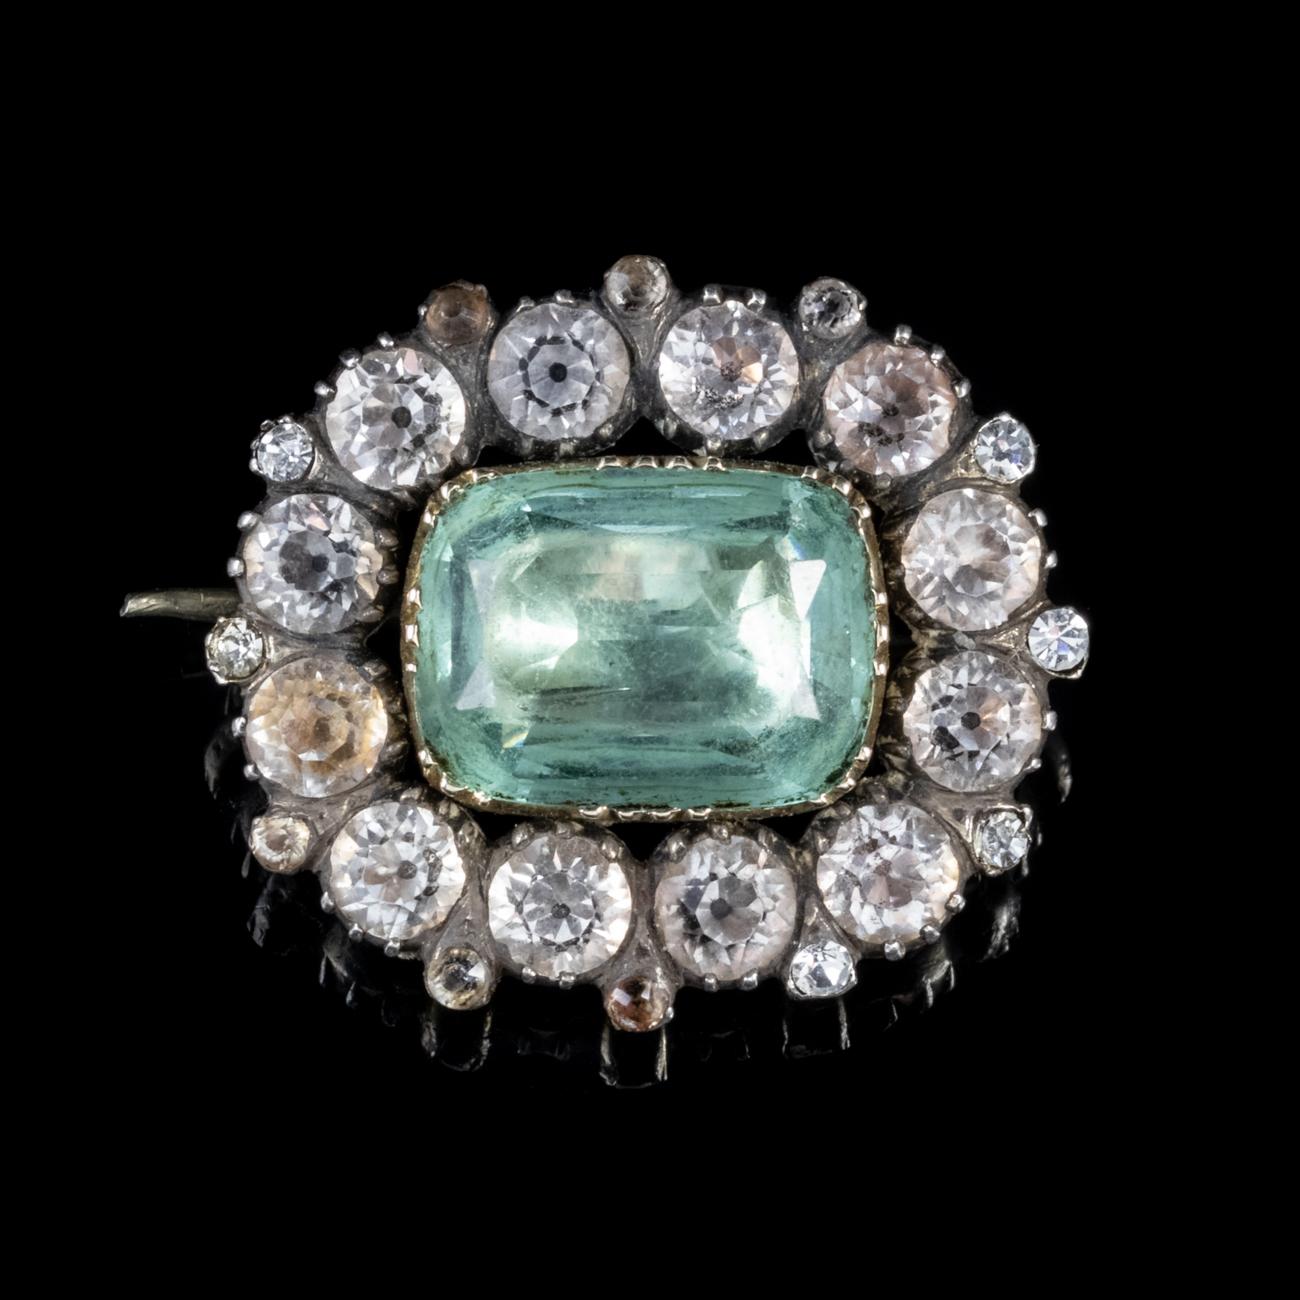 This stunning Antique Georgian brooch has been modelled in Silver and set with an array of Paste stones. It features a gorgeous central blue Paste stone which is set in an 18ct Yellow Gold gallery and is surrounded by a halo of white Paste stones.